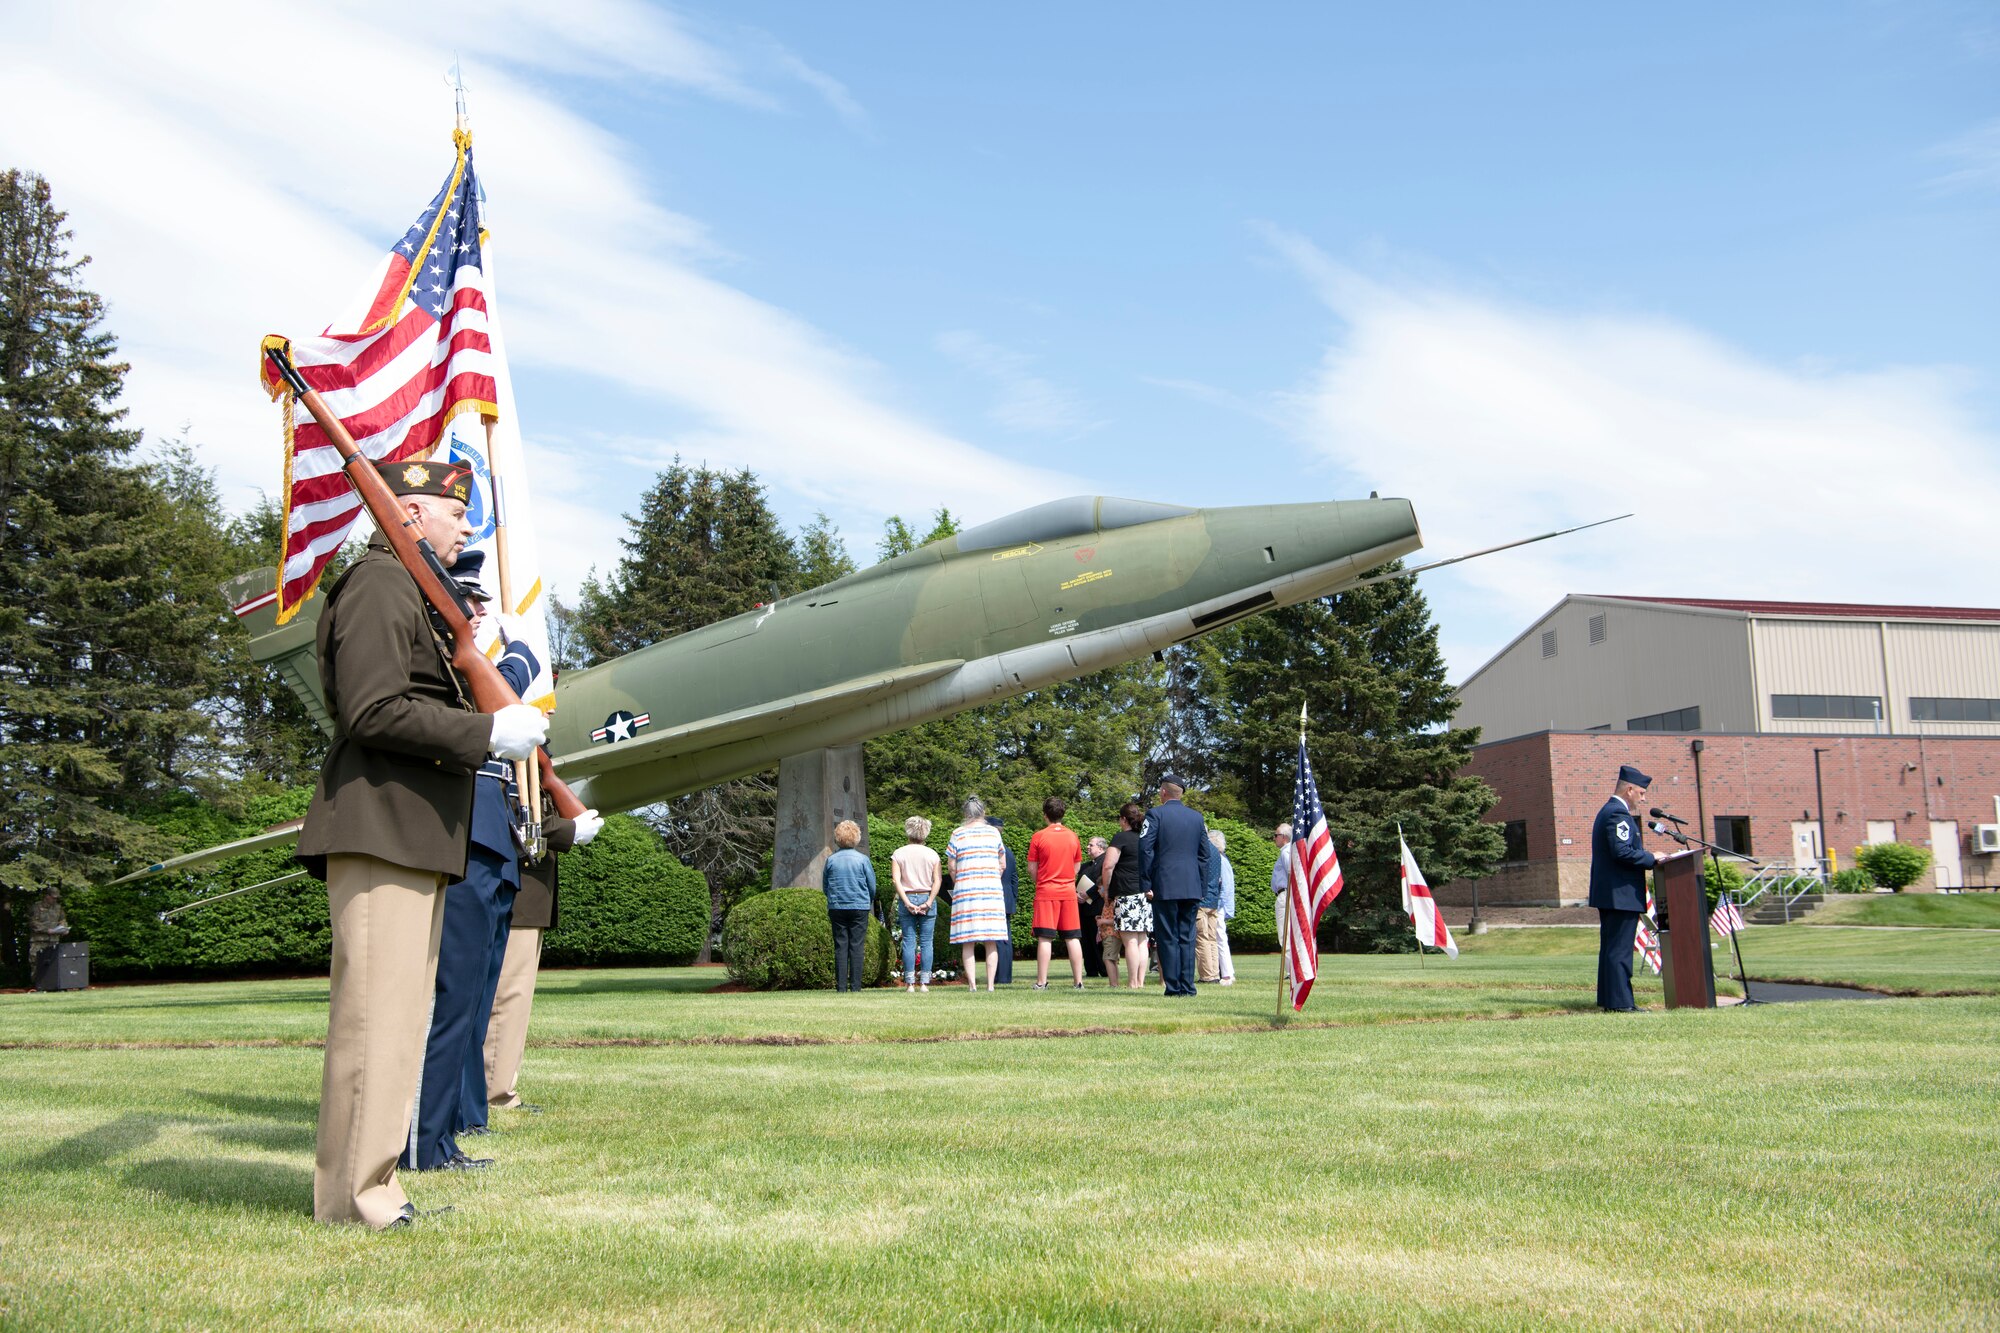 Barnestomers honor the 13 Airmen fallen in flight from the 104th Fighter Wing during the F-100 memorial rededication ceremony, May 20, 2022, at Barnes Air National Guard Base, Massachusetts. The F-100 monument was originally dedicated on May 17, 1987 by the 104FW Chief Master Sergeant’s Council. It continues to serve as a reminder of fallen Airmen’s impact on the unit.(U.S. Air National Guard photo by Staff Sgt. Hanna Smith)